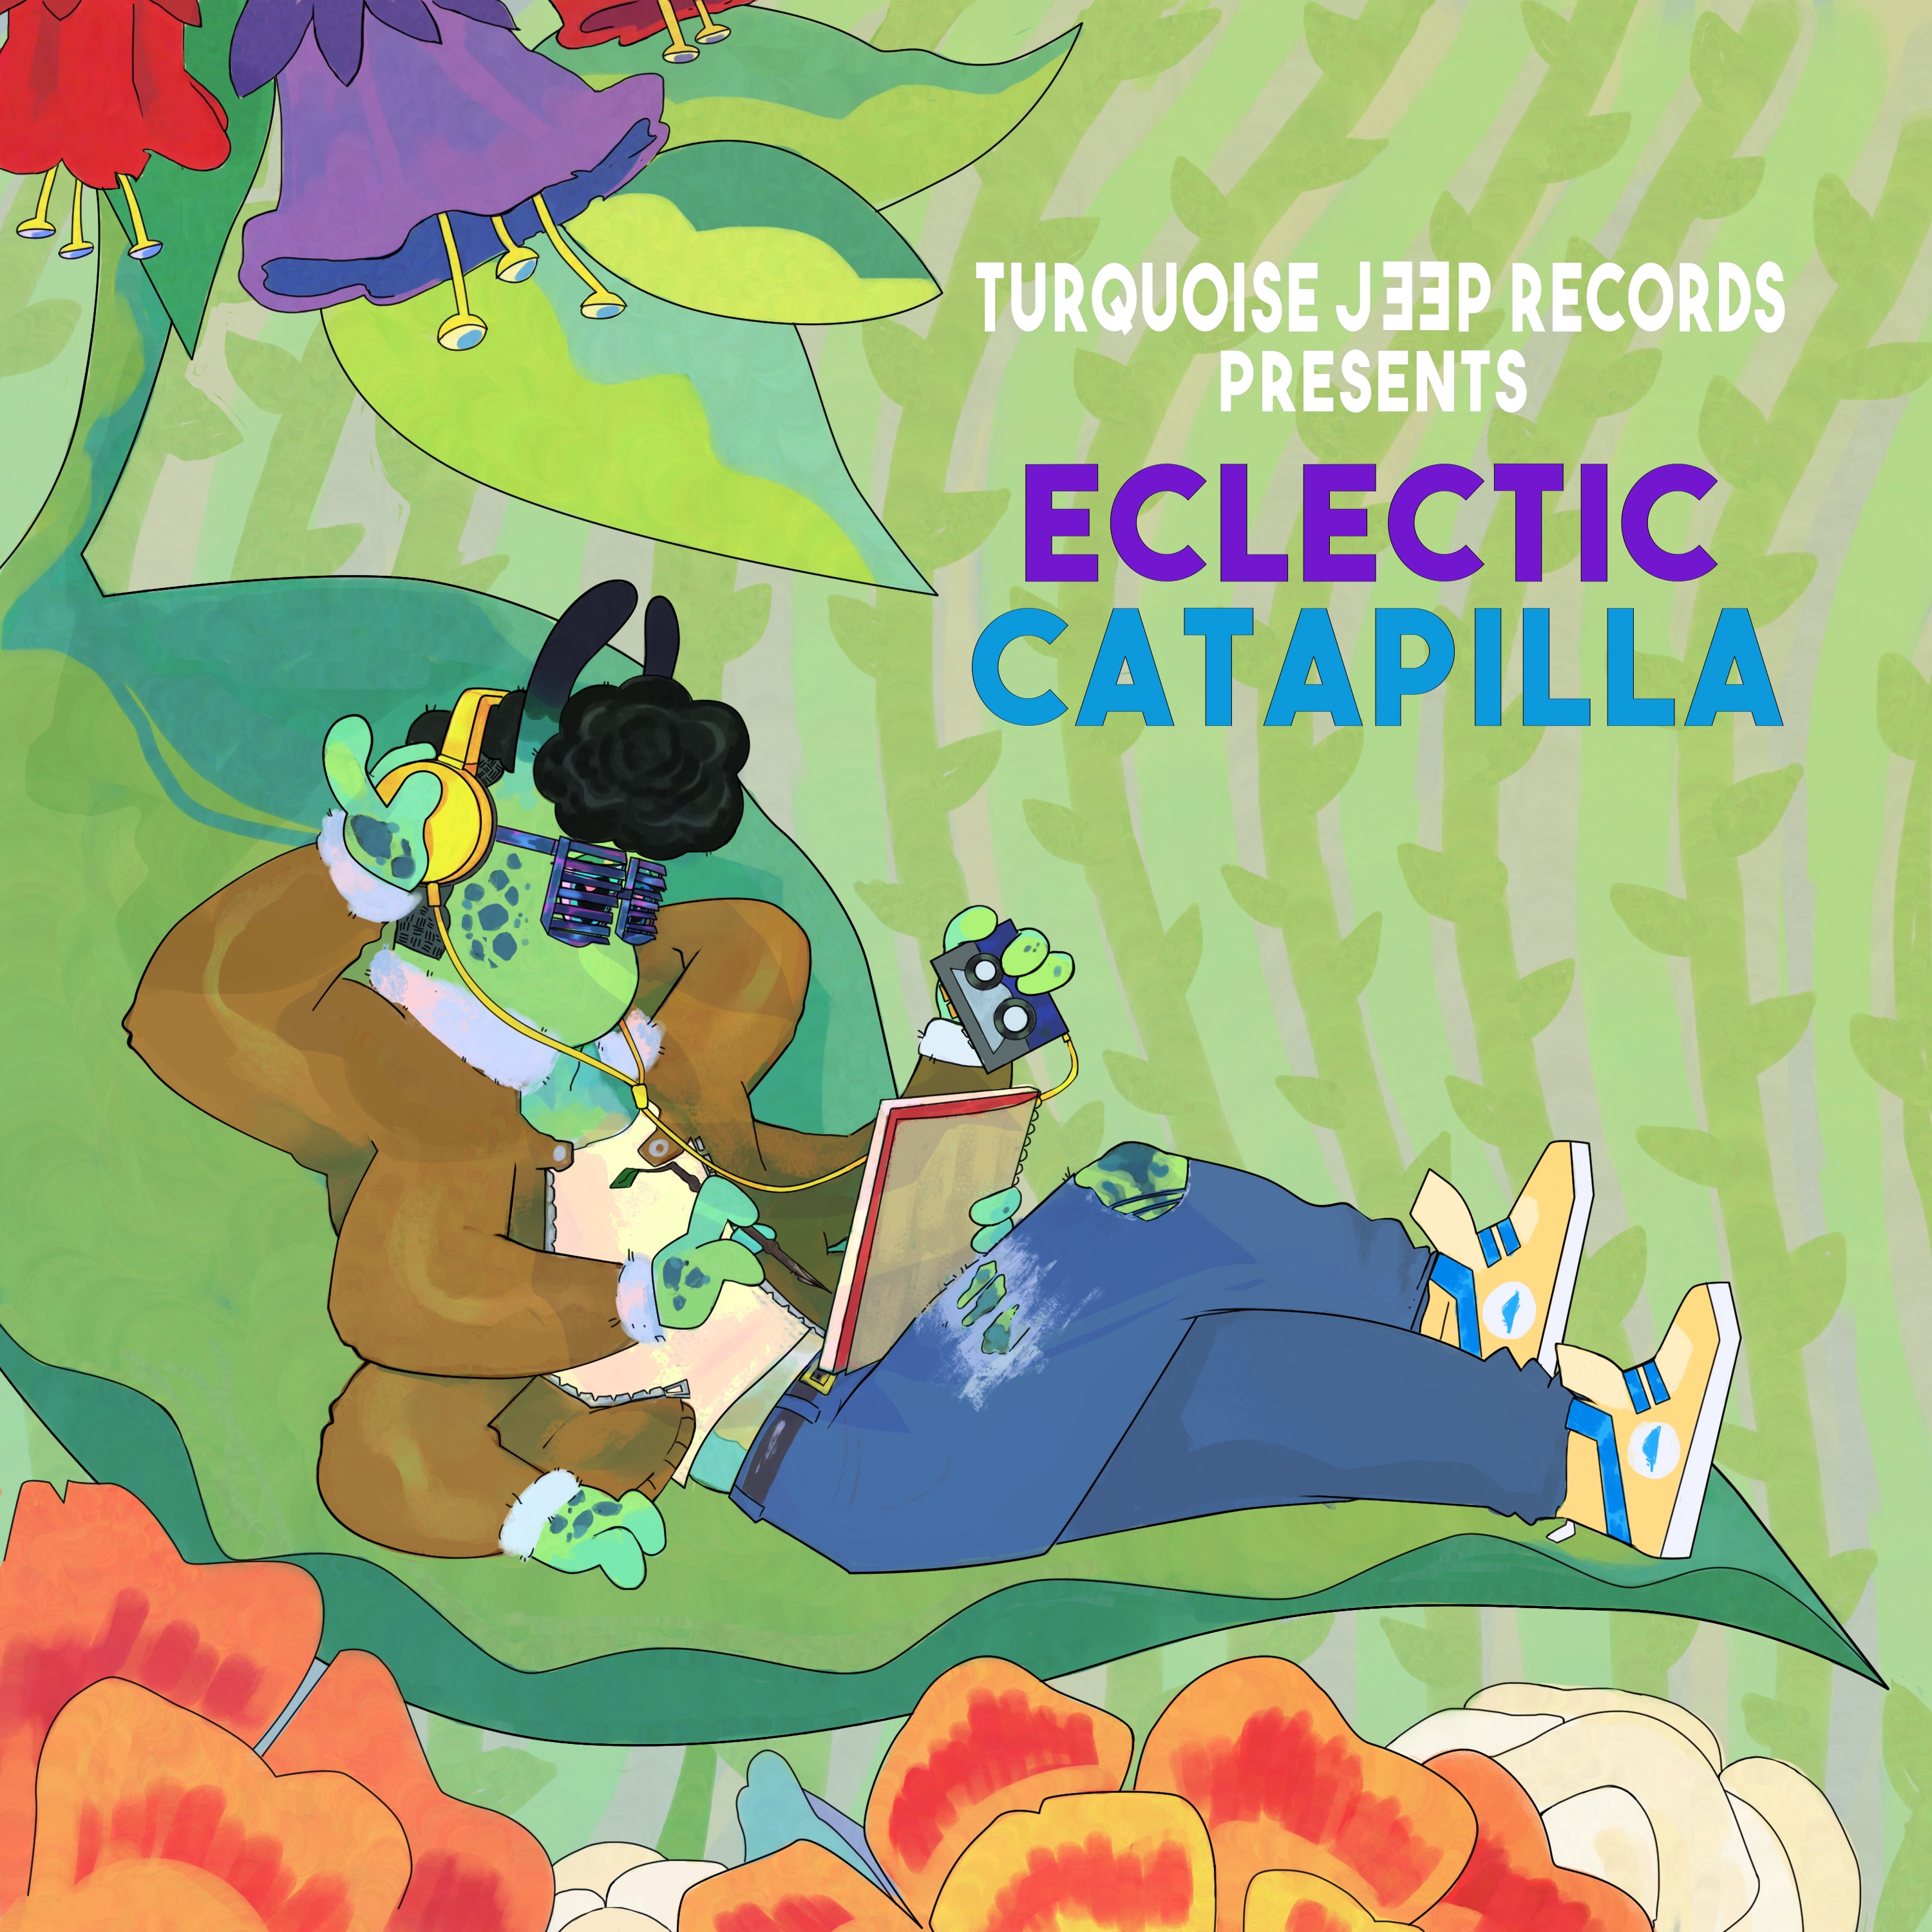 Turquoise Jeep Records: Eclectic Catapilla